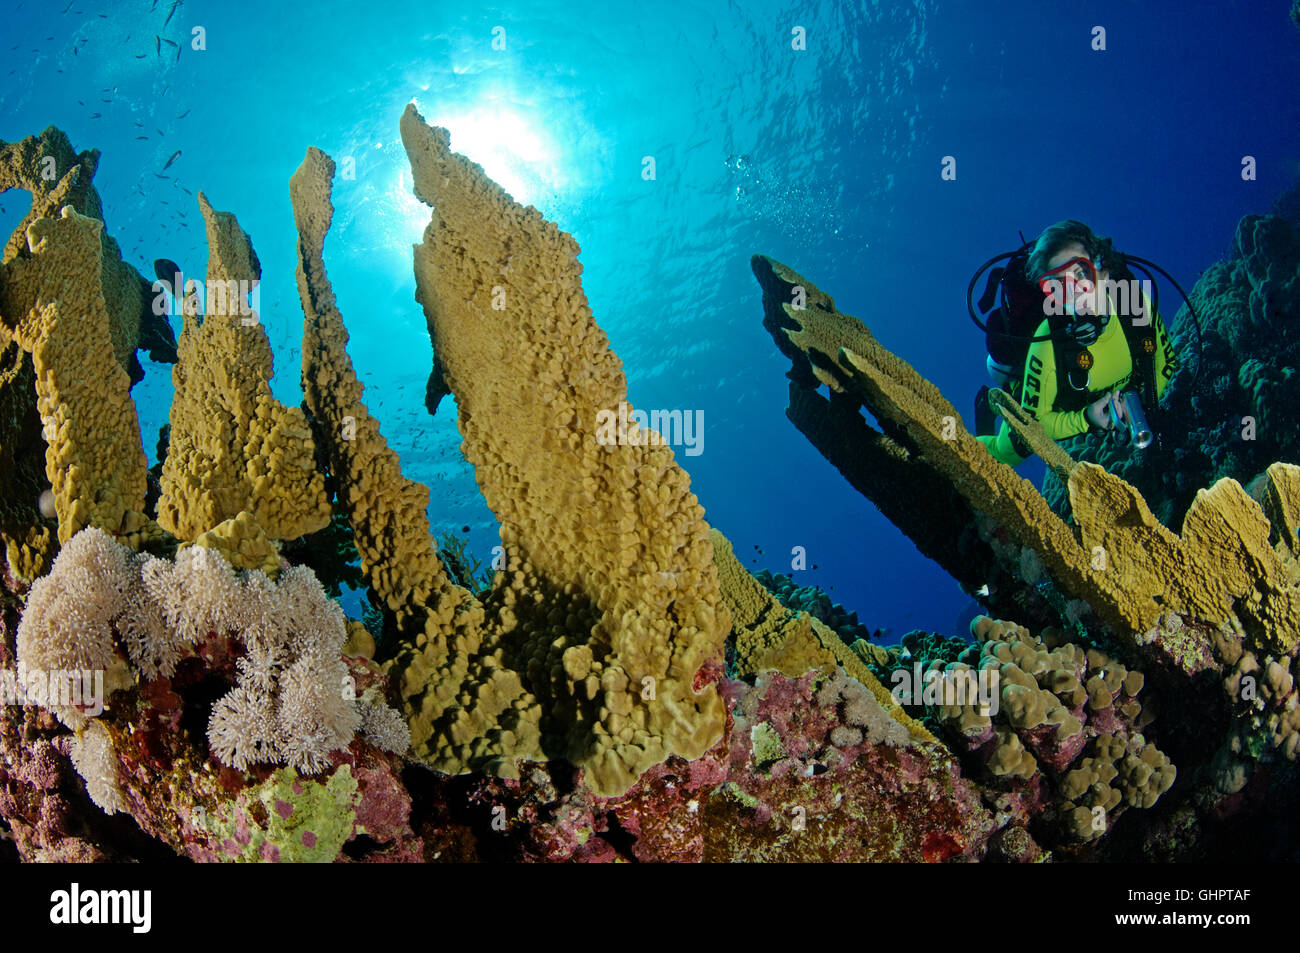 Millepora platyphylla, Wello fire coral, firecoral and scuba diver, Zabargad Reef, El Gubal, Red Sea, Egypt, Africa Stock Photo